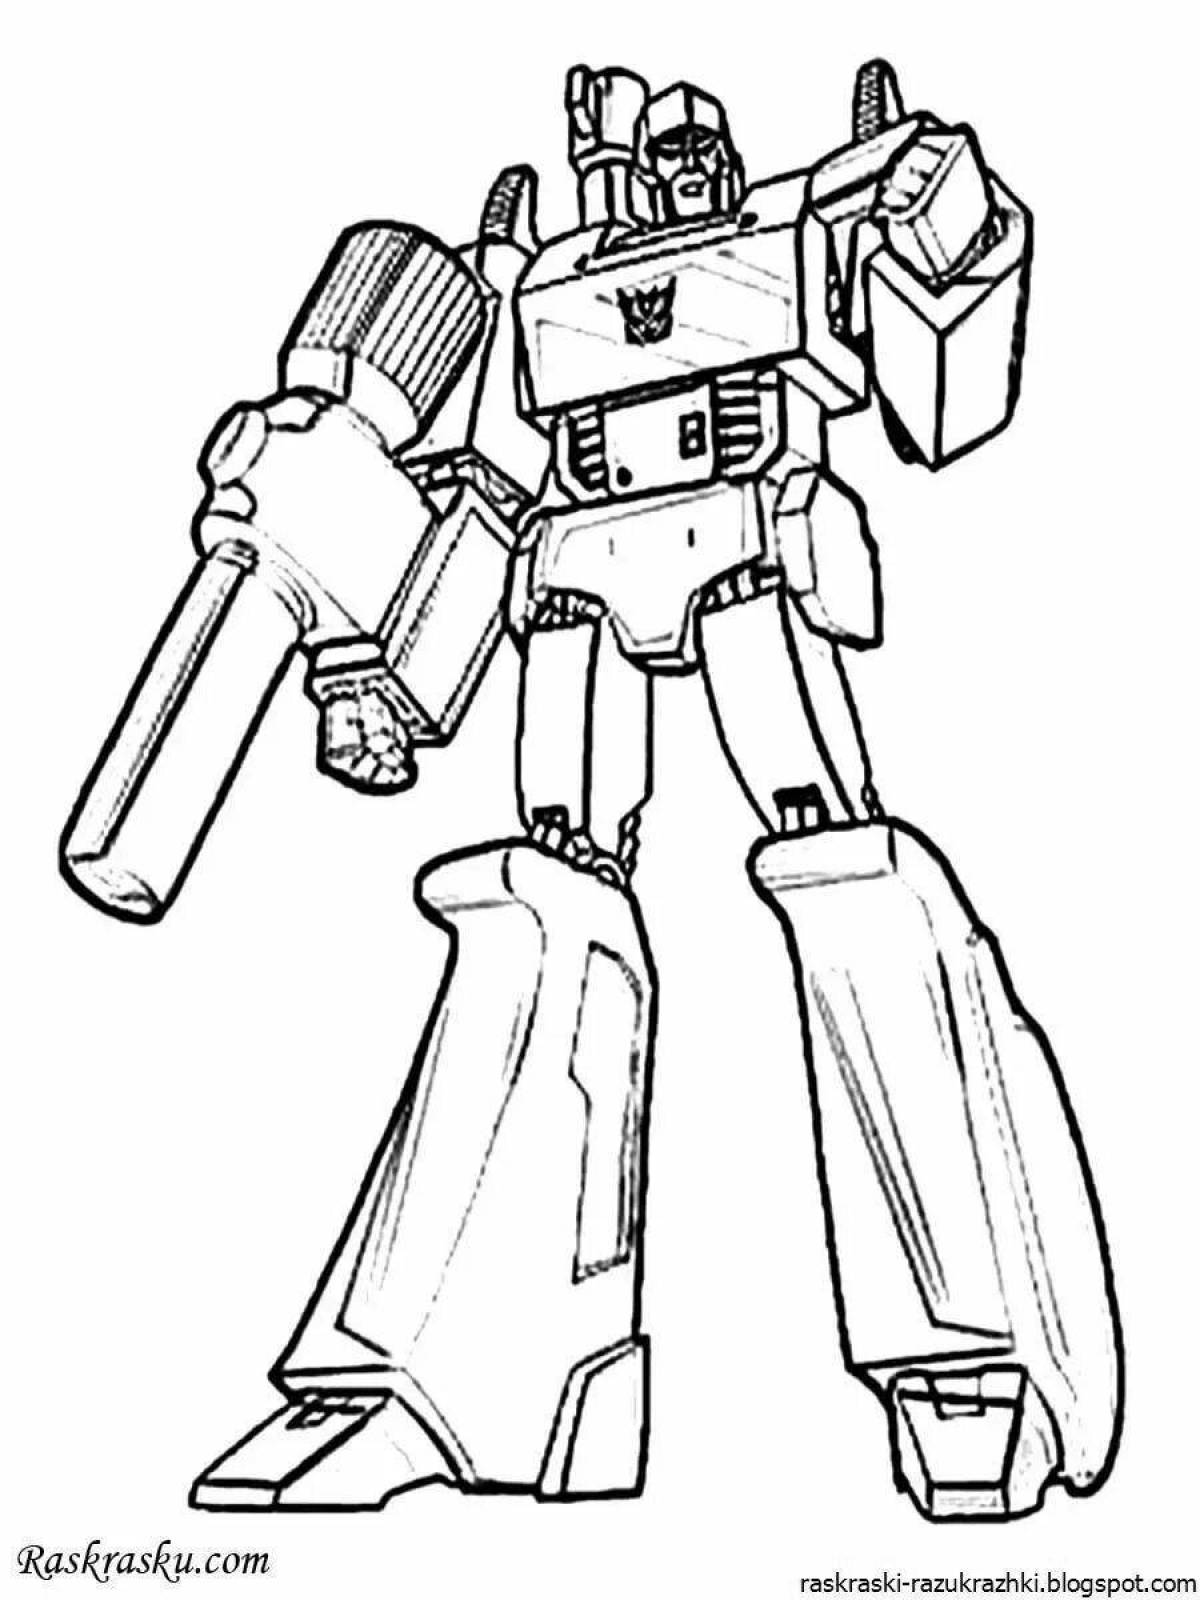 Coloring pages of transformer robots for boys